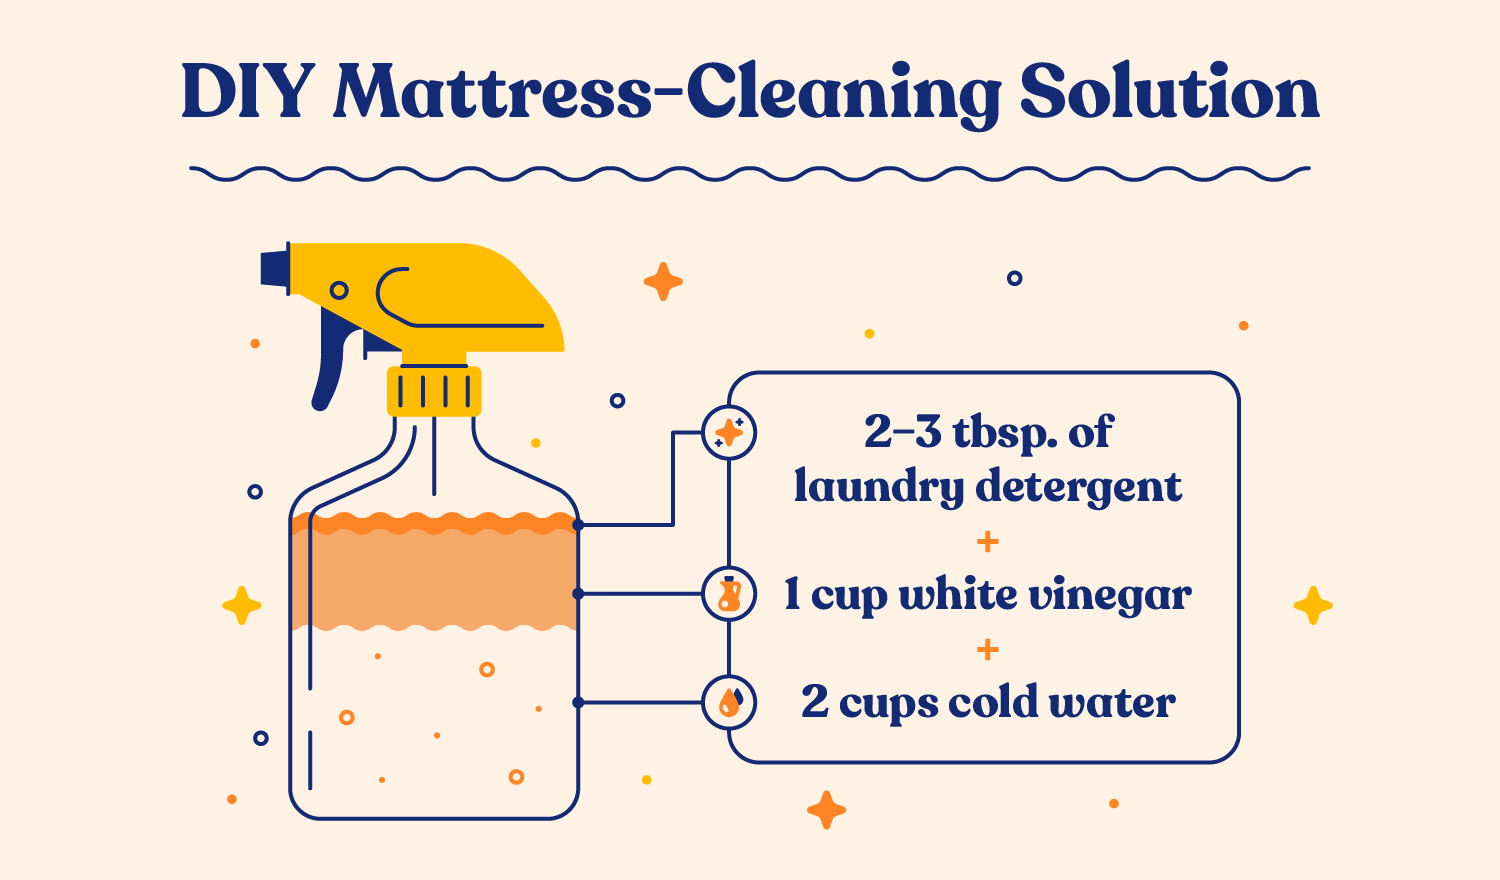 Methods To Remove Dog Pee From Mattress